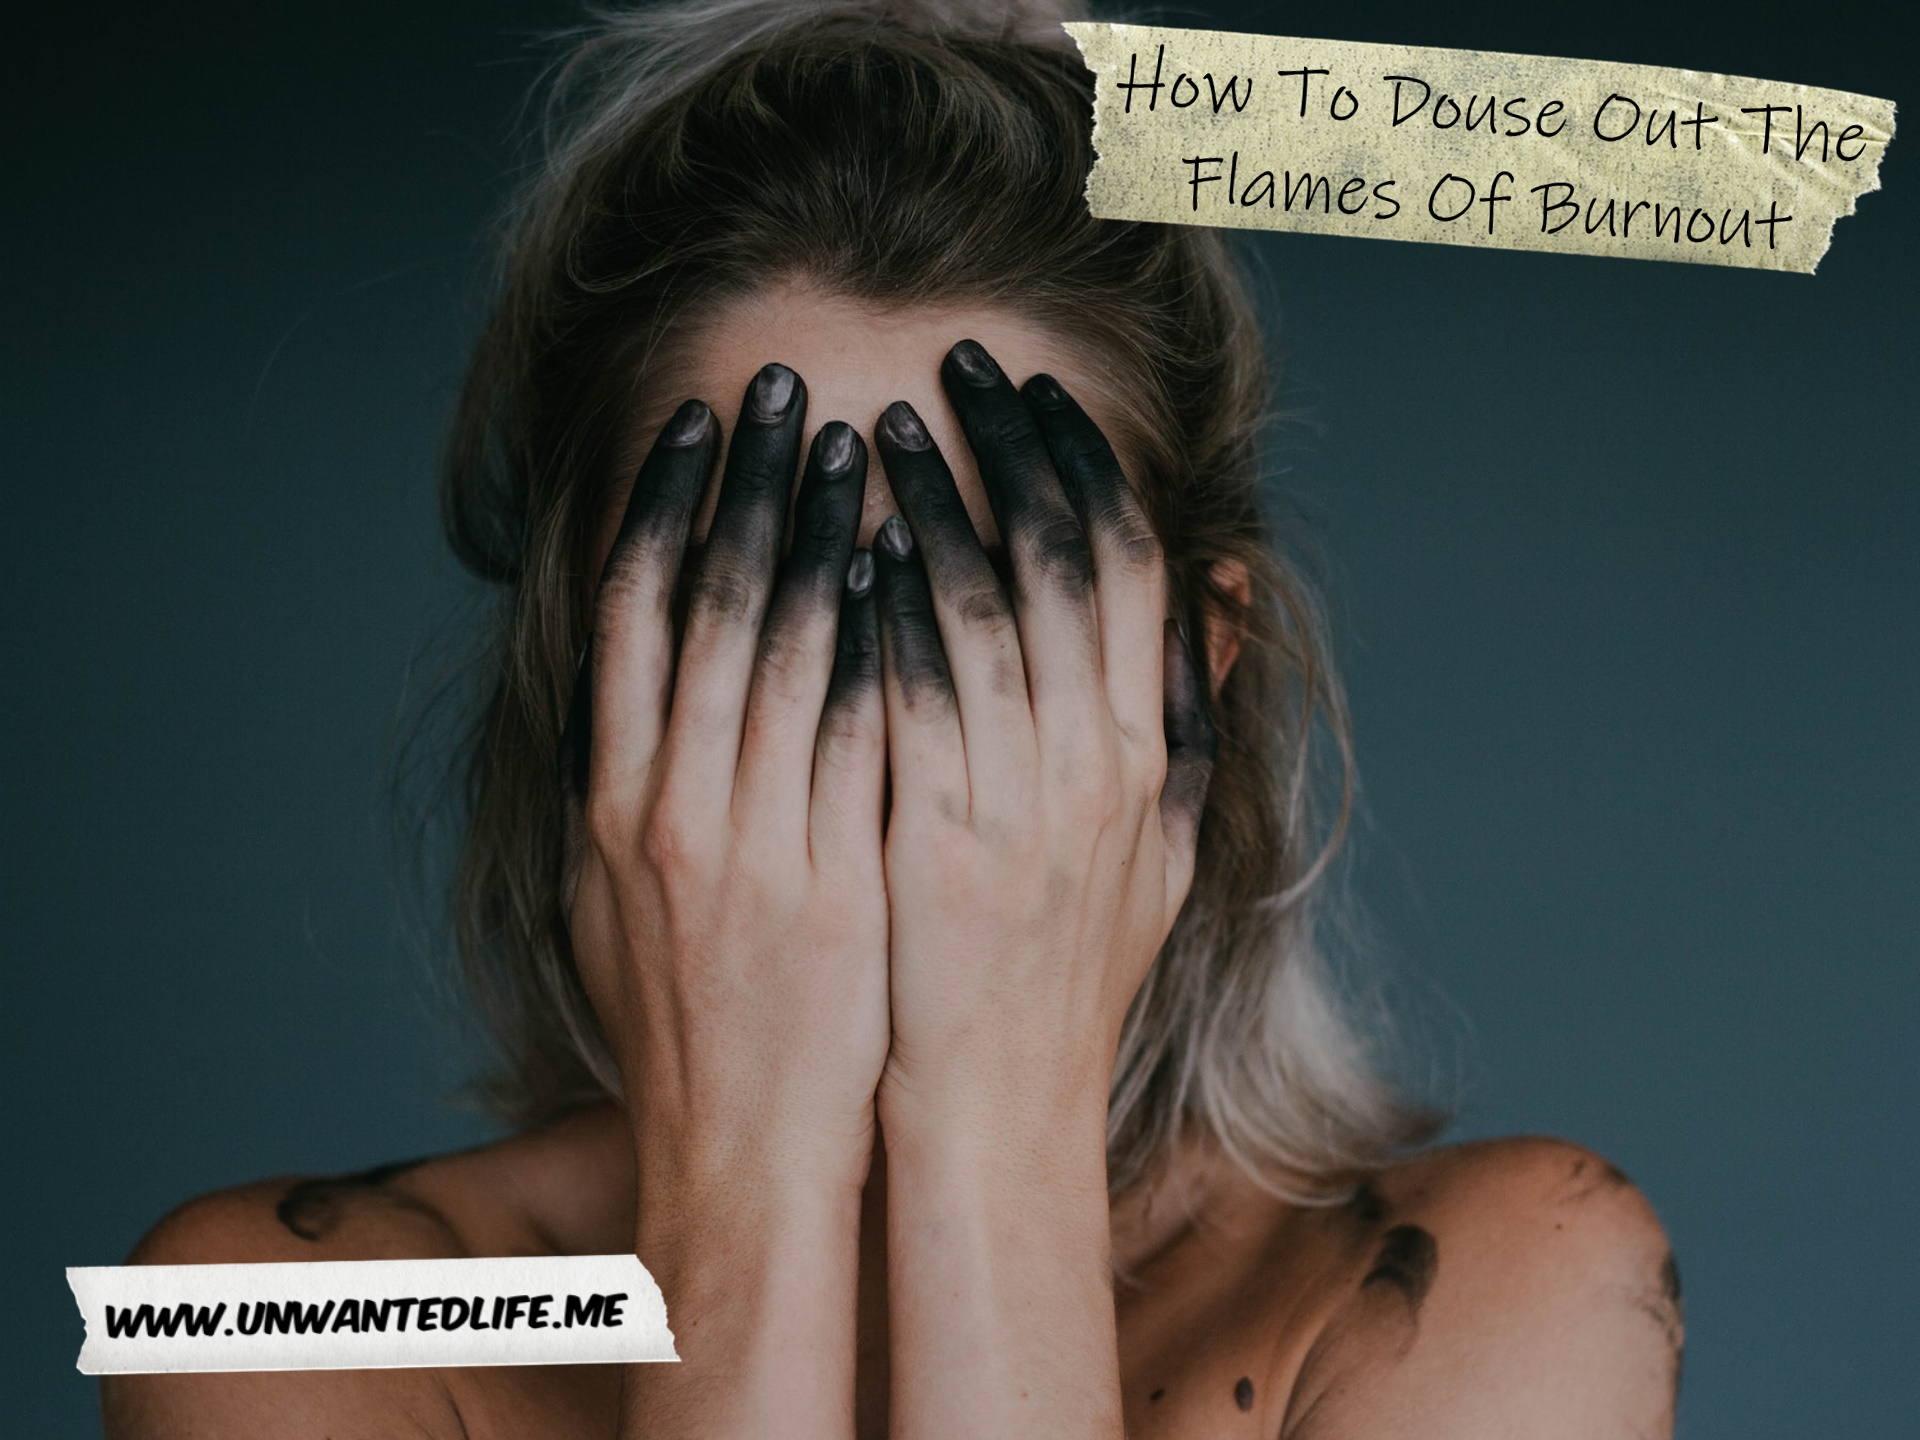 A photo of a woman with black fingers covering her face with her hands to represent the topic of the article - How To Douse Out The Flames Of Burnout